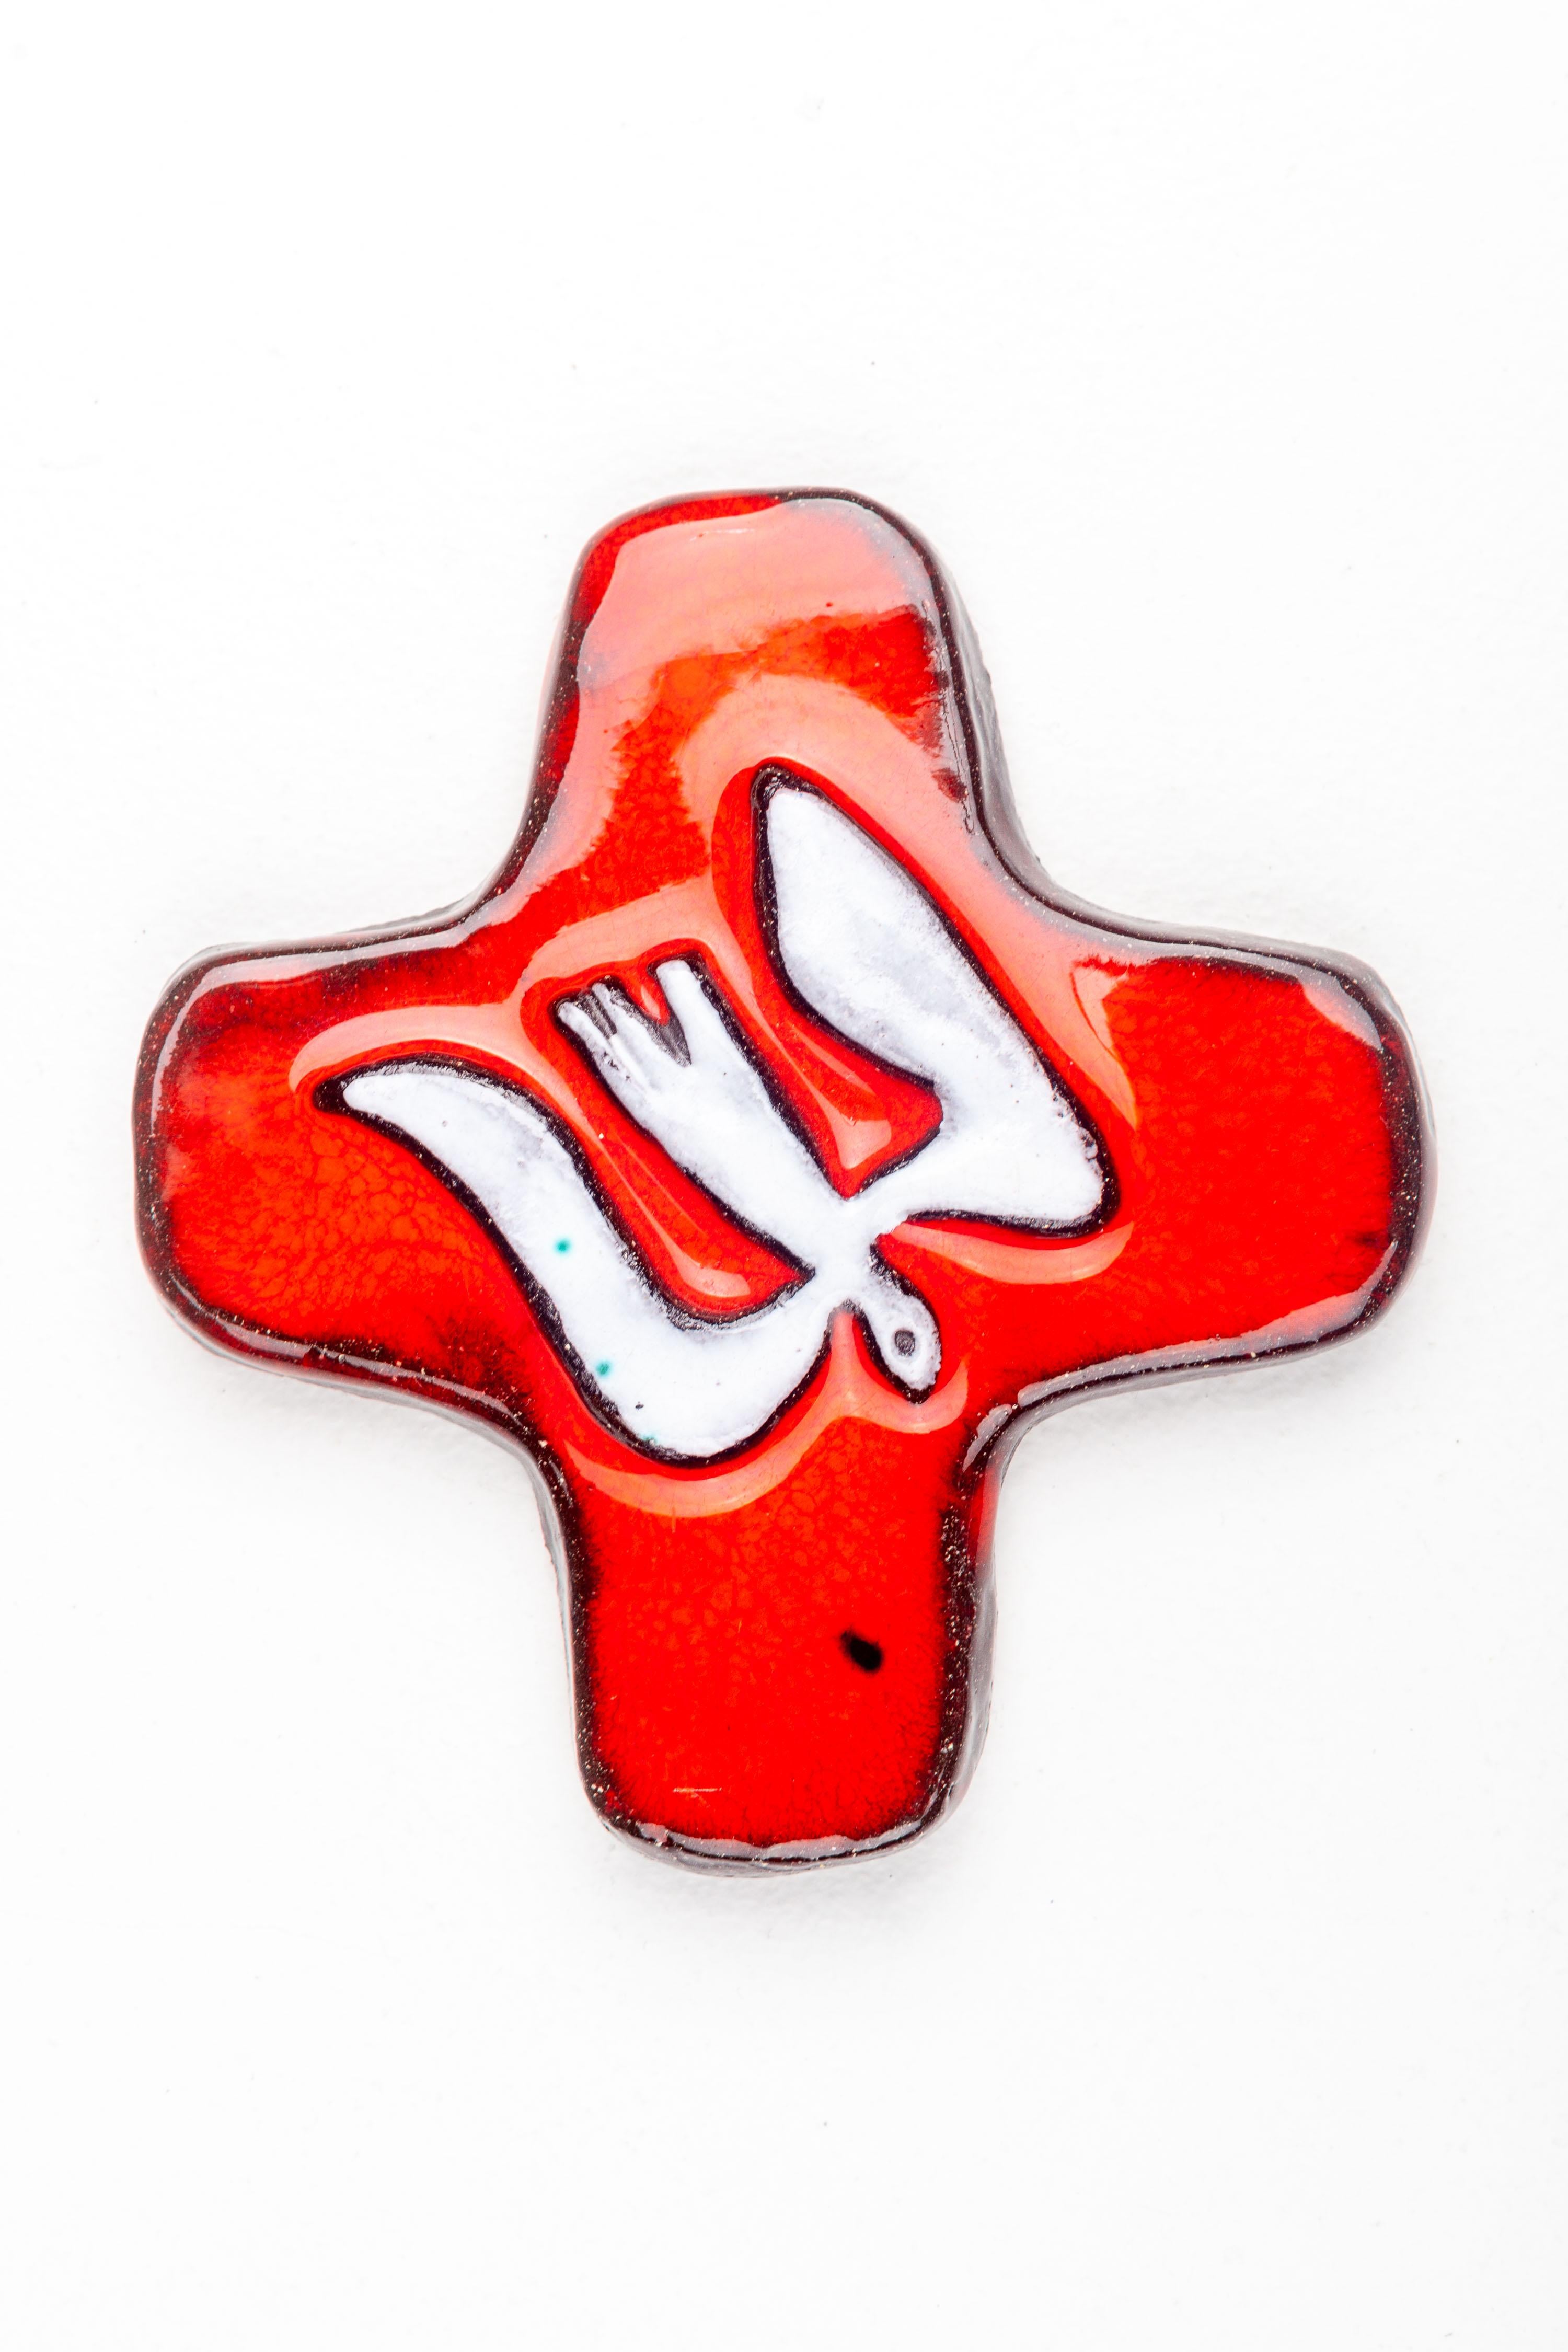 Mid-20th Century Abstract Mid-Century Modern Ceramic Wall Cross, Red & White, Handmade For Sale